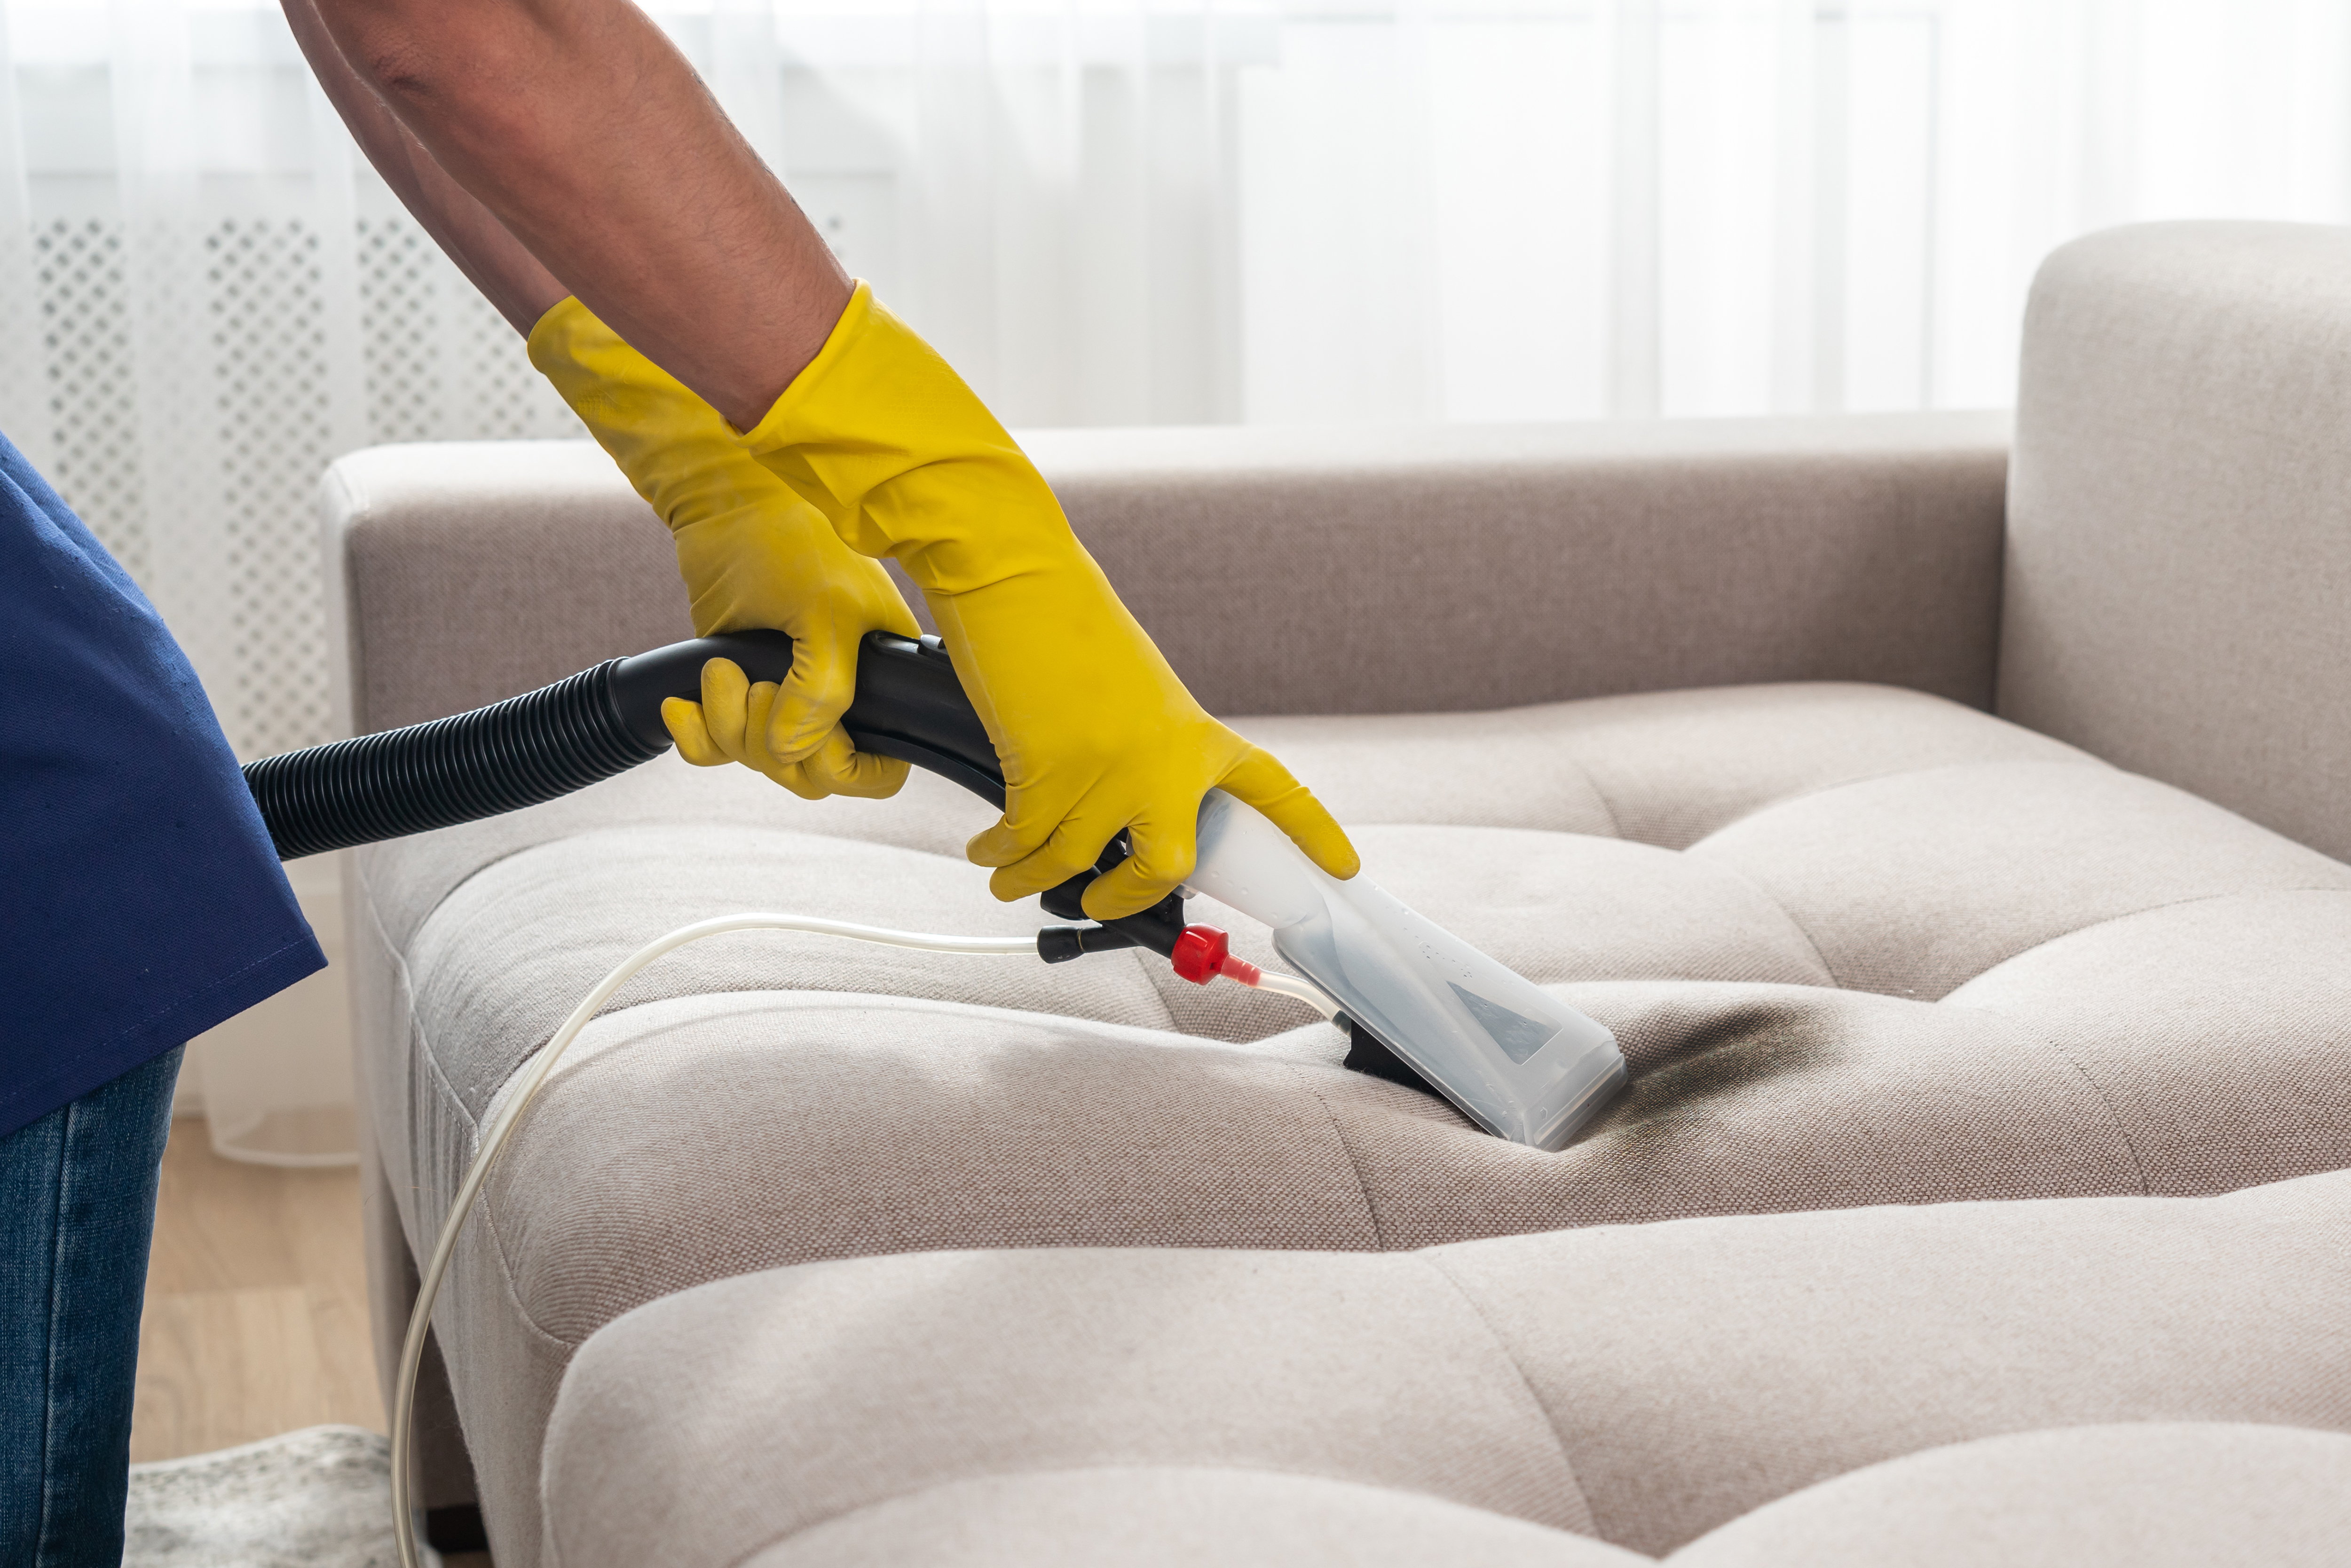 The Best Upholstery Cleaners in 2022